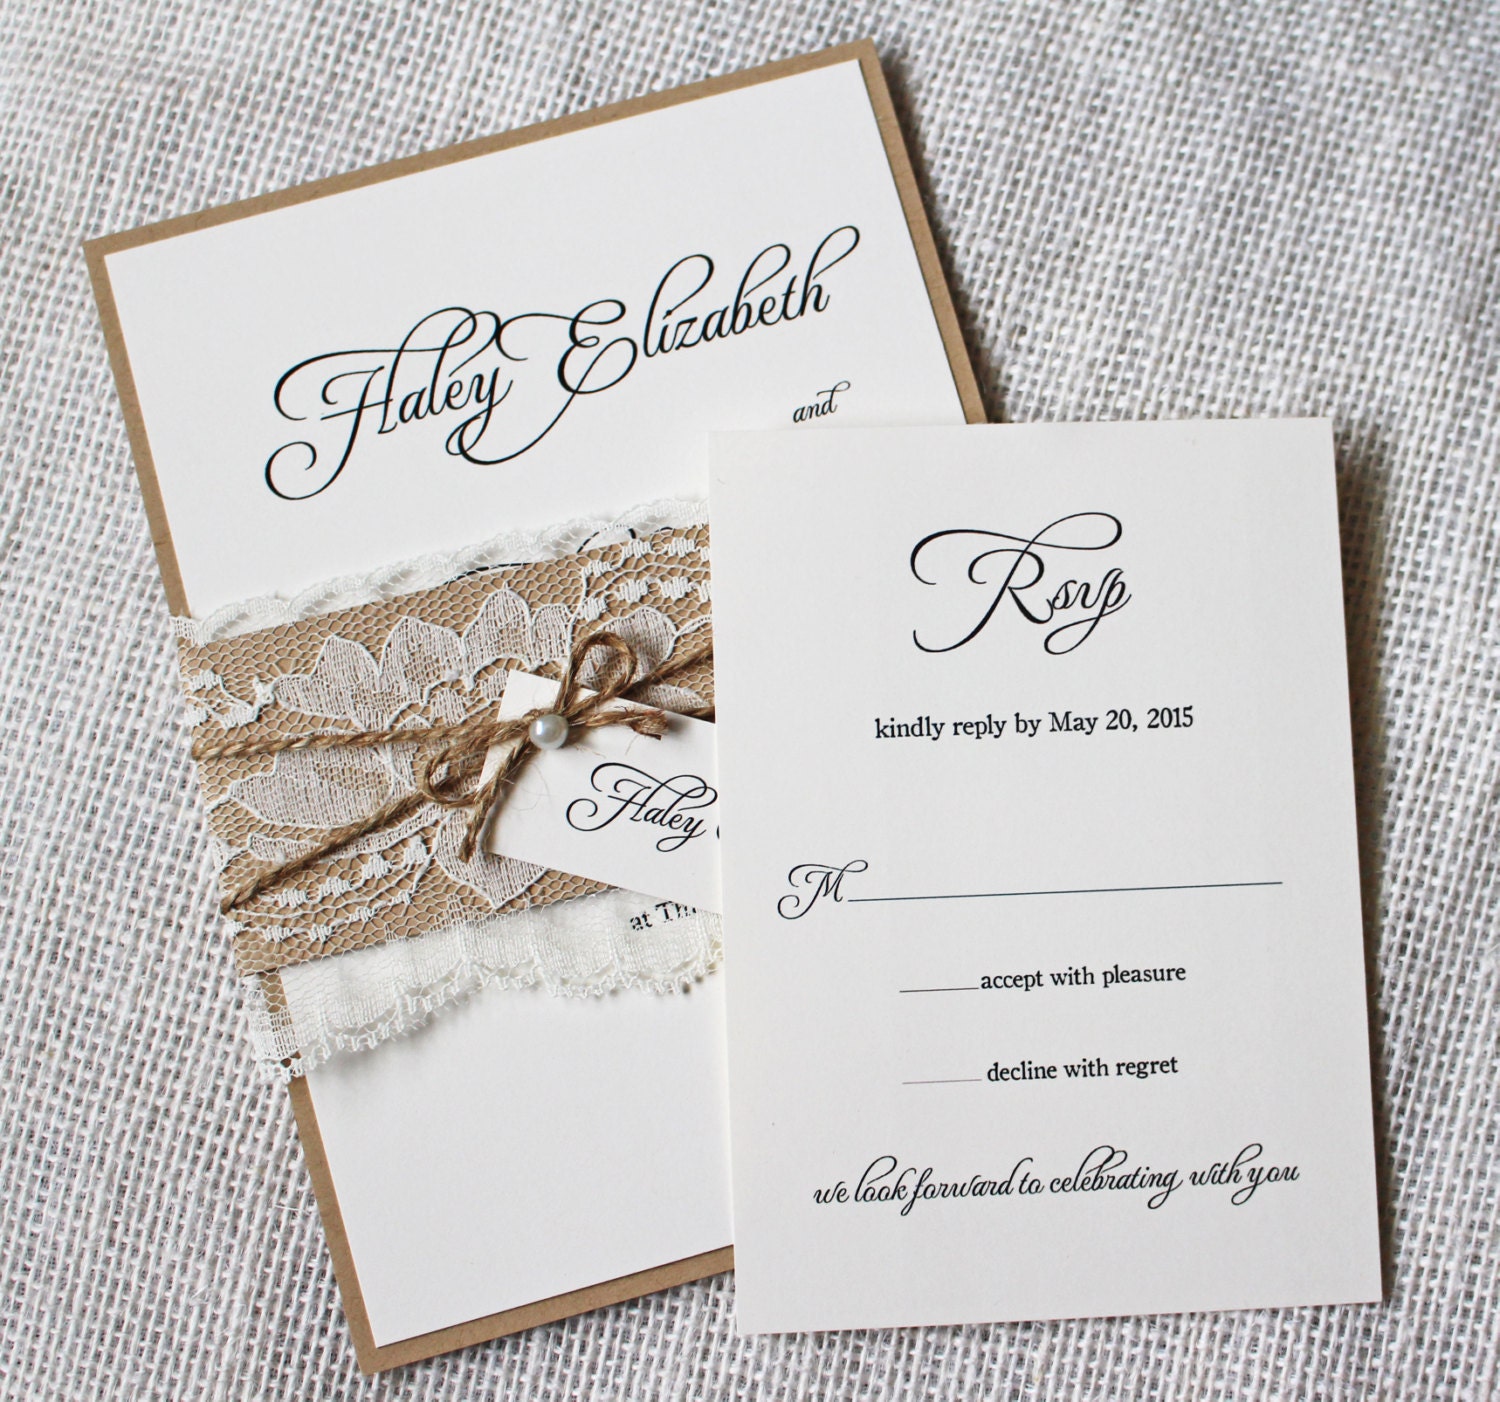 Rustic Lace Wedding Invitations. Lace Wedding by LoveofCreating